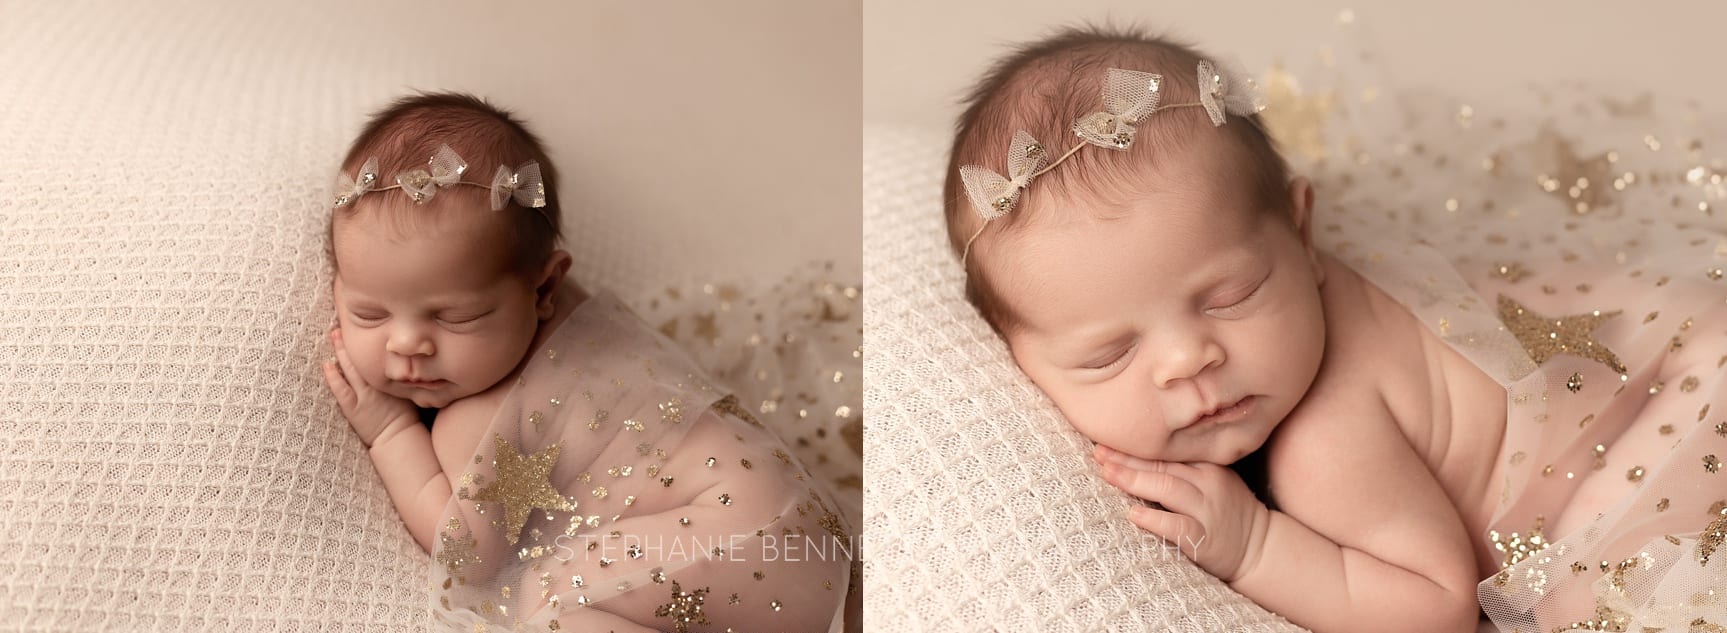 Newborn photography lakeville mn star props